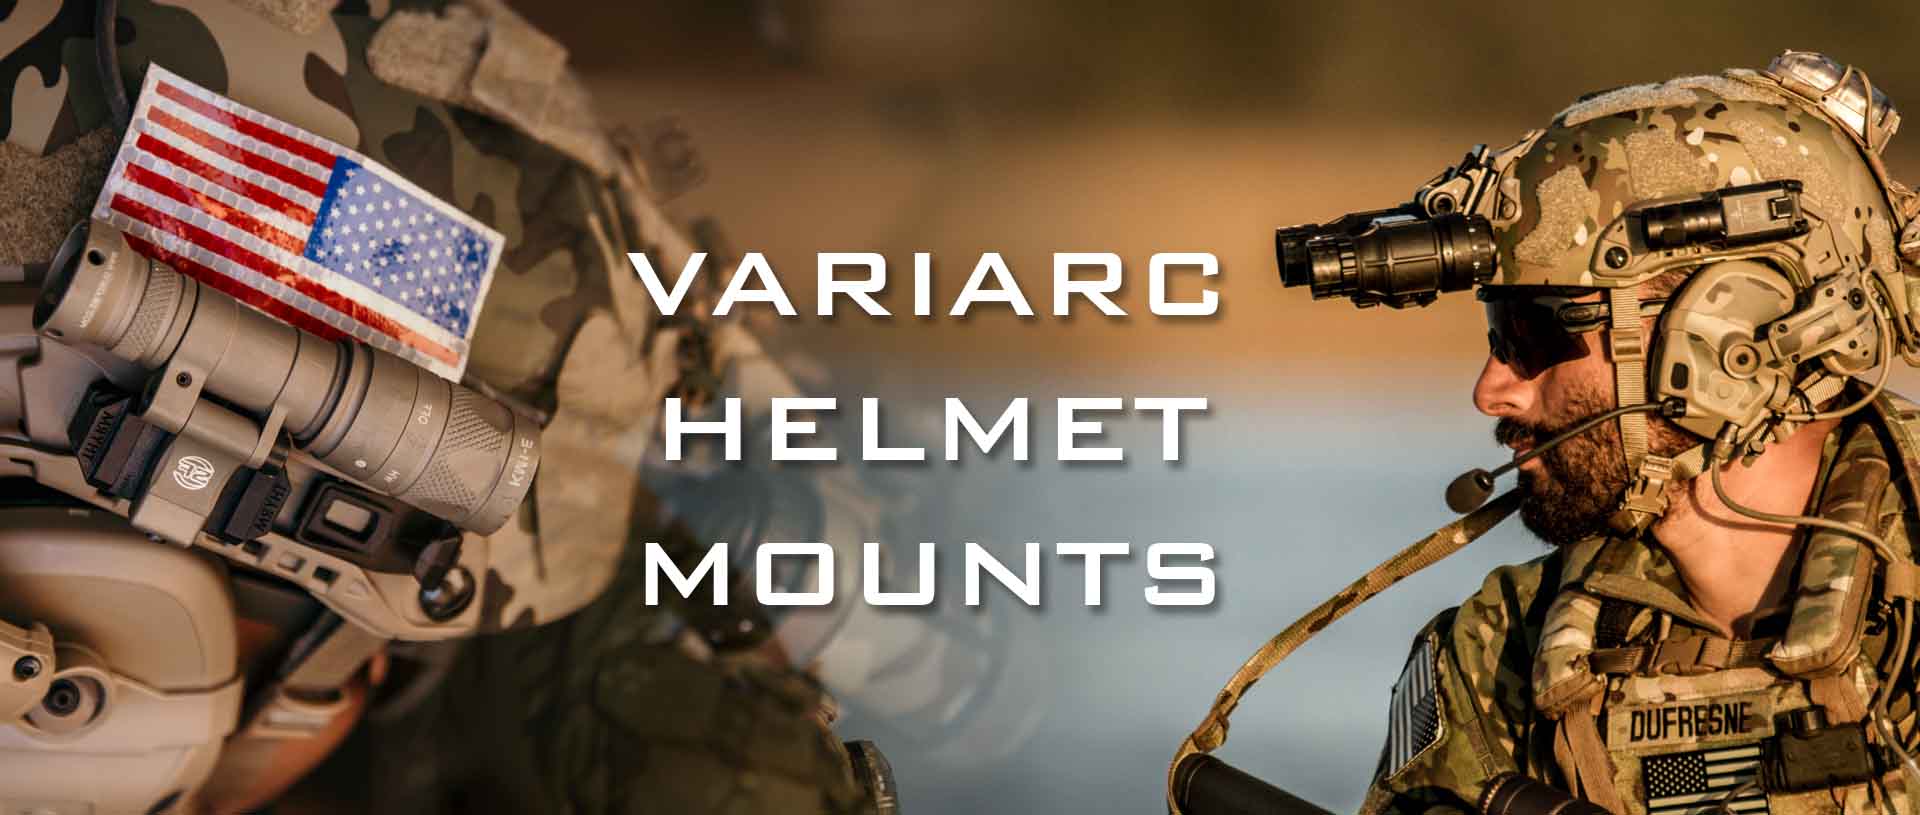 VariArc Helmet Mounts attached to two helmets alongside other gear